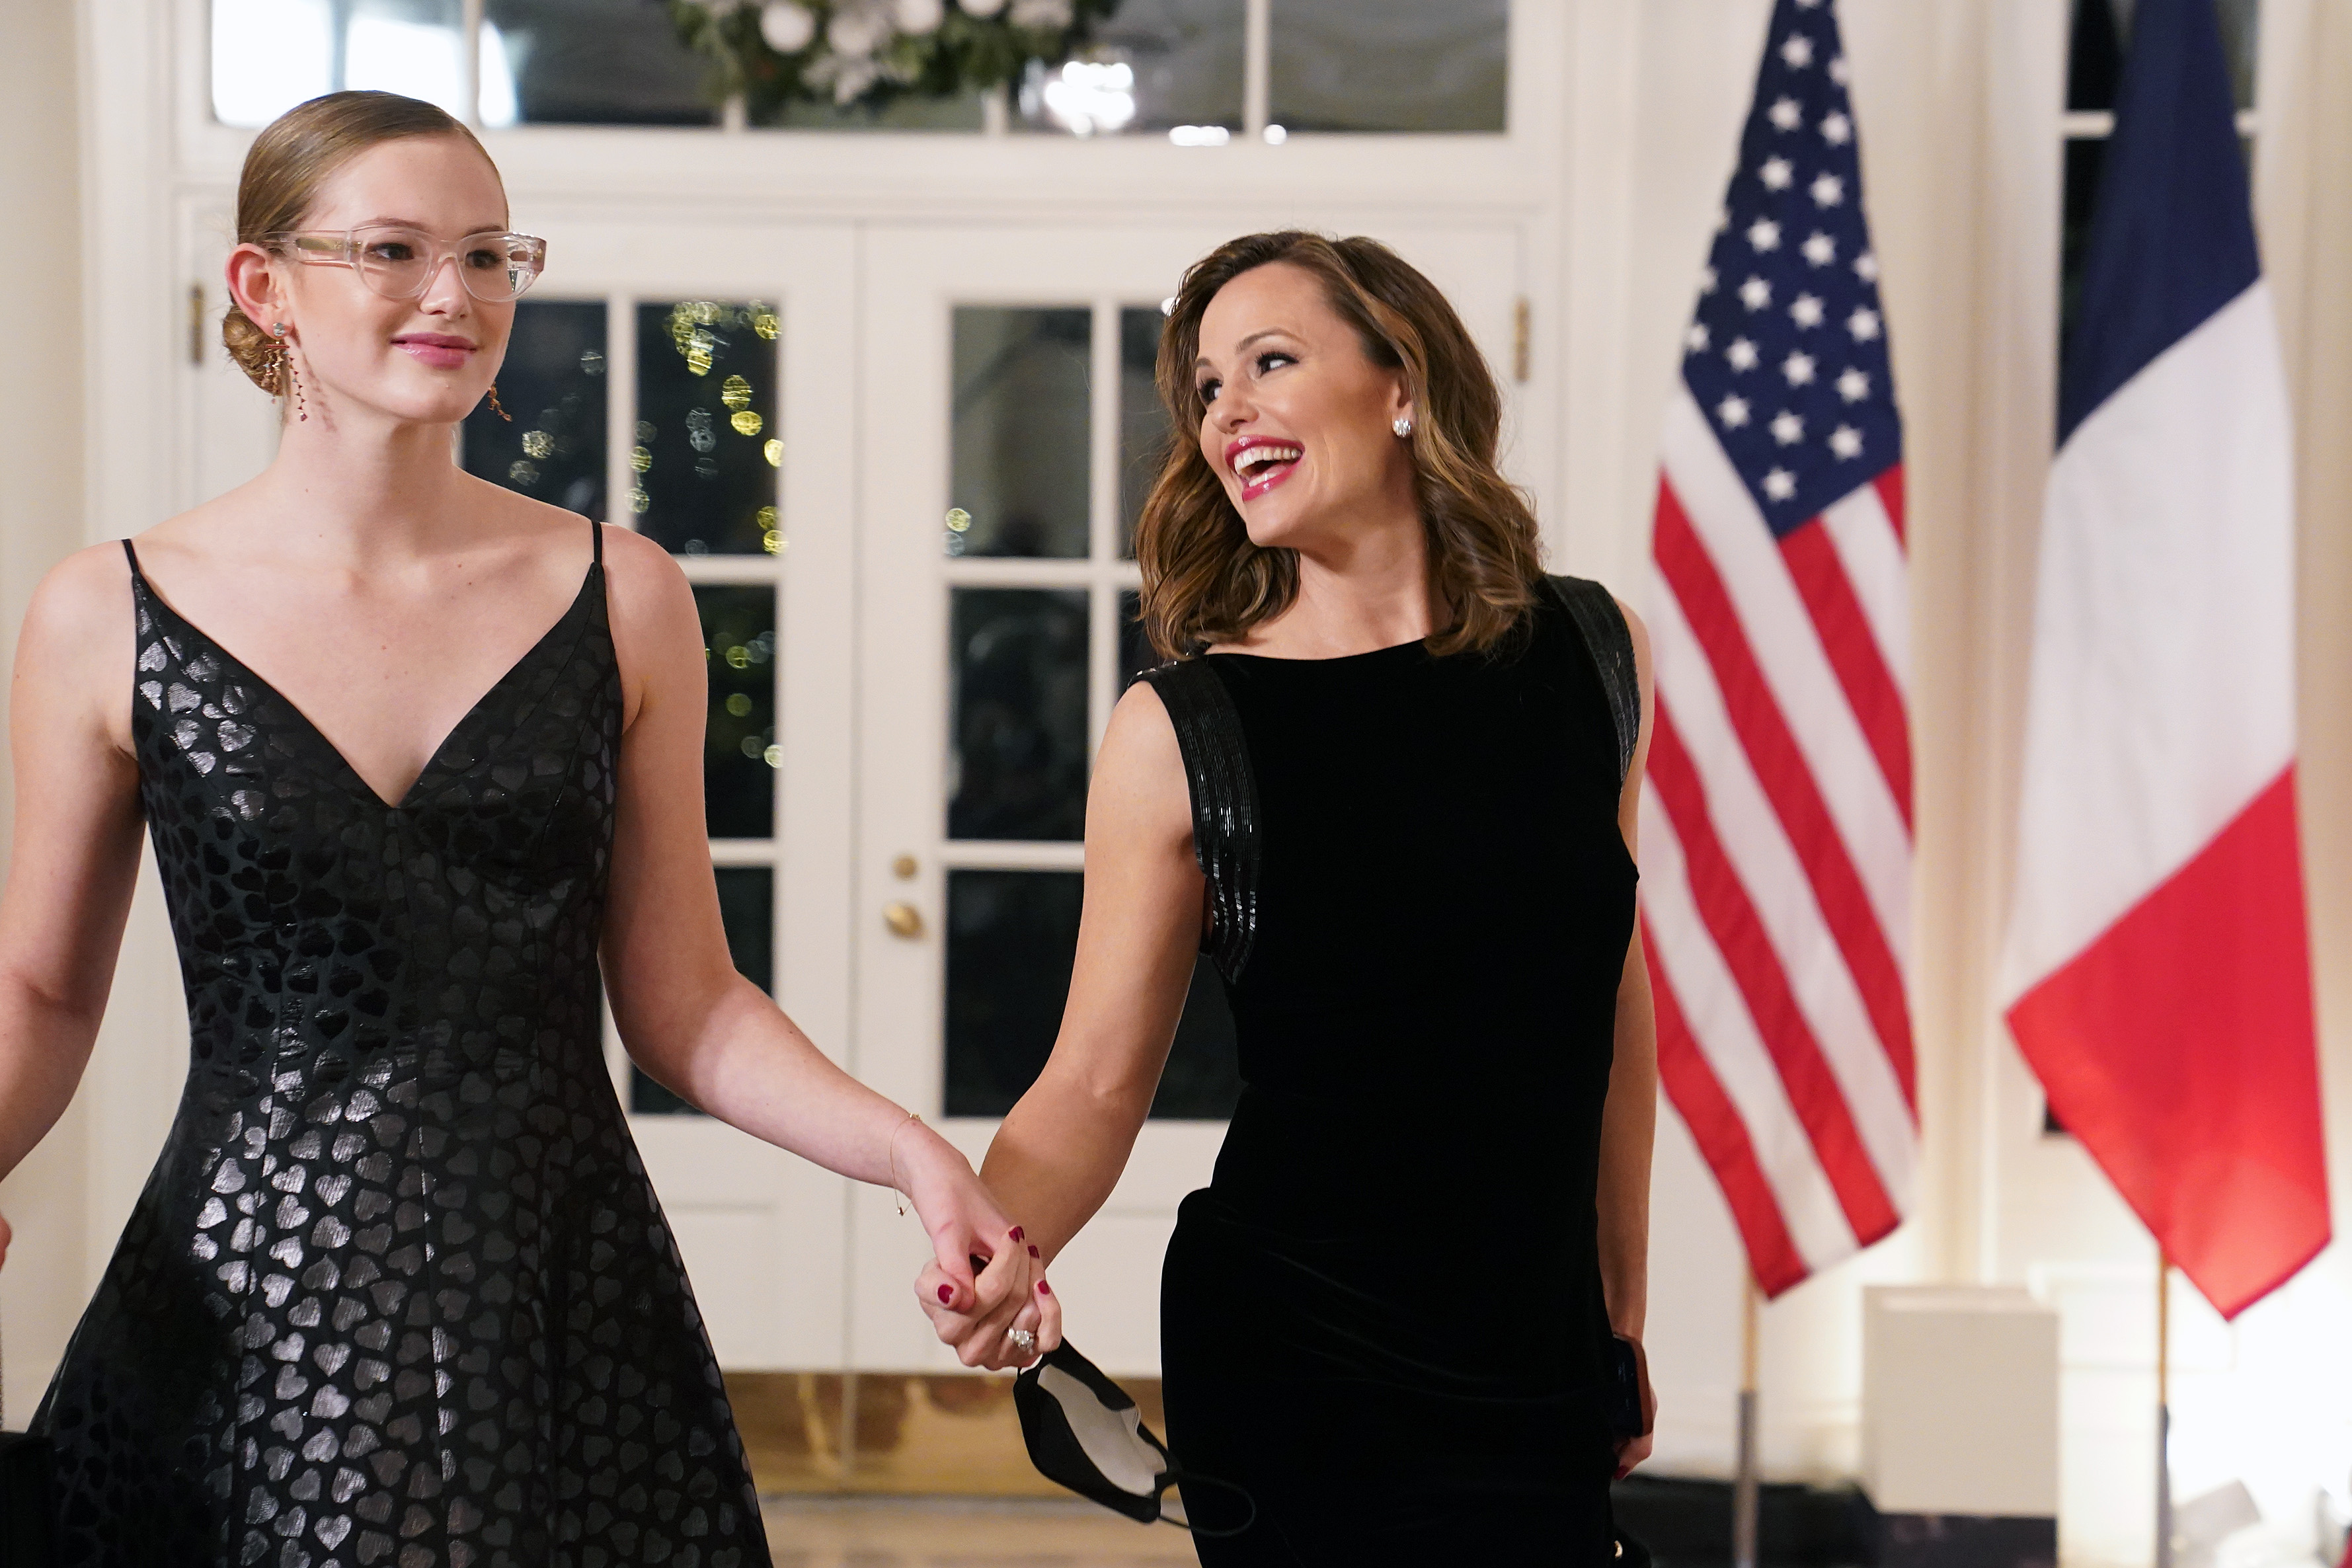 Jennifer Garner and her daughter Violet attended the White House state dinner honoring French President Emmanuel Macron in Washington, DC, on December 1, 2022 | Source: Getty Images